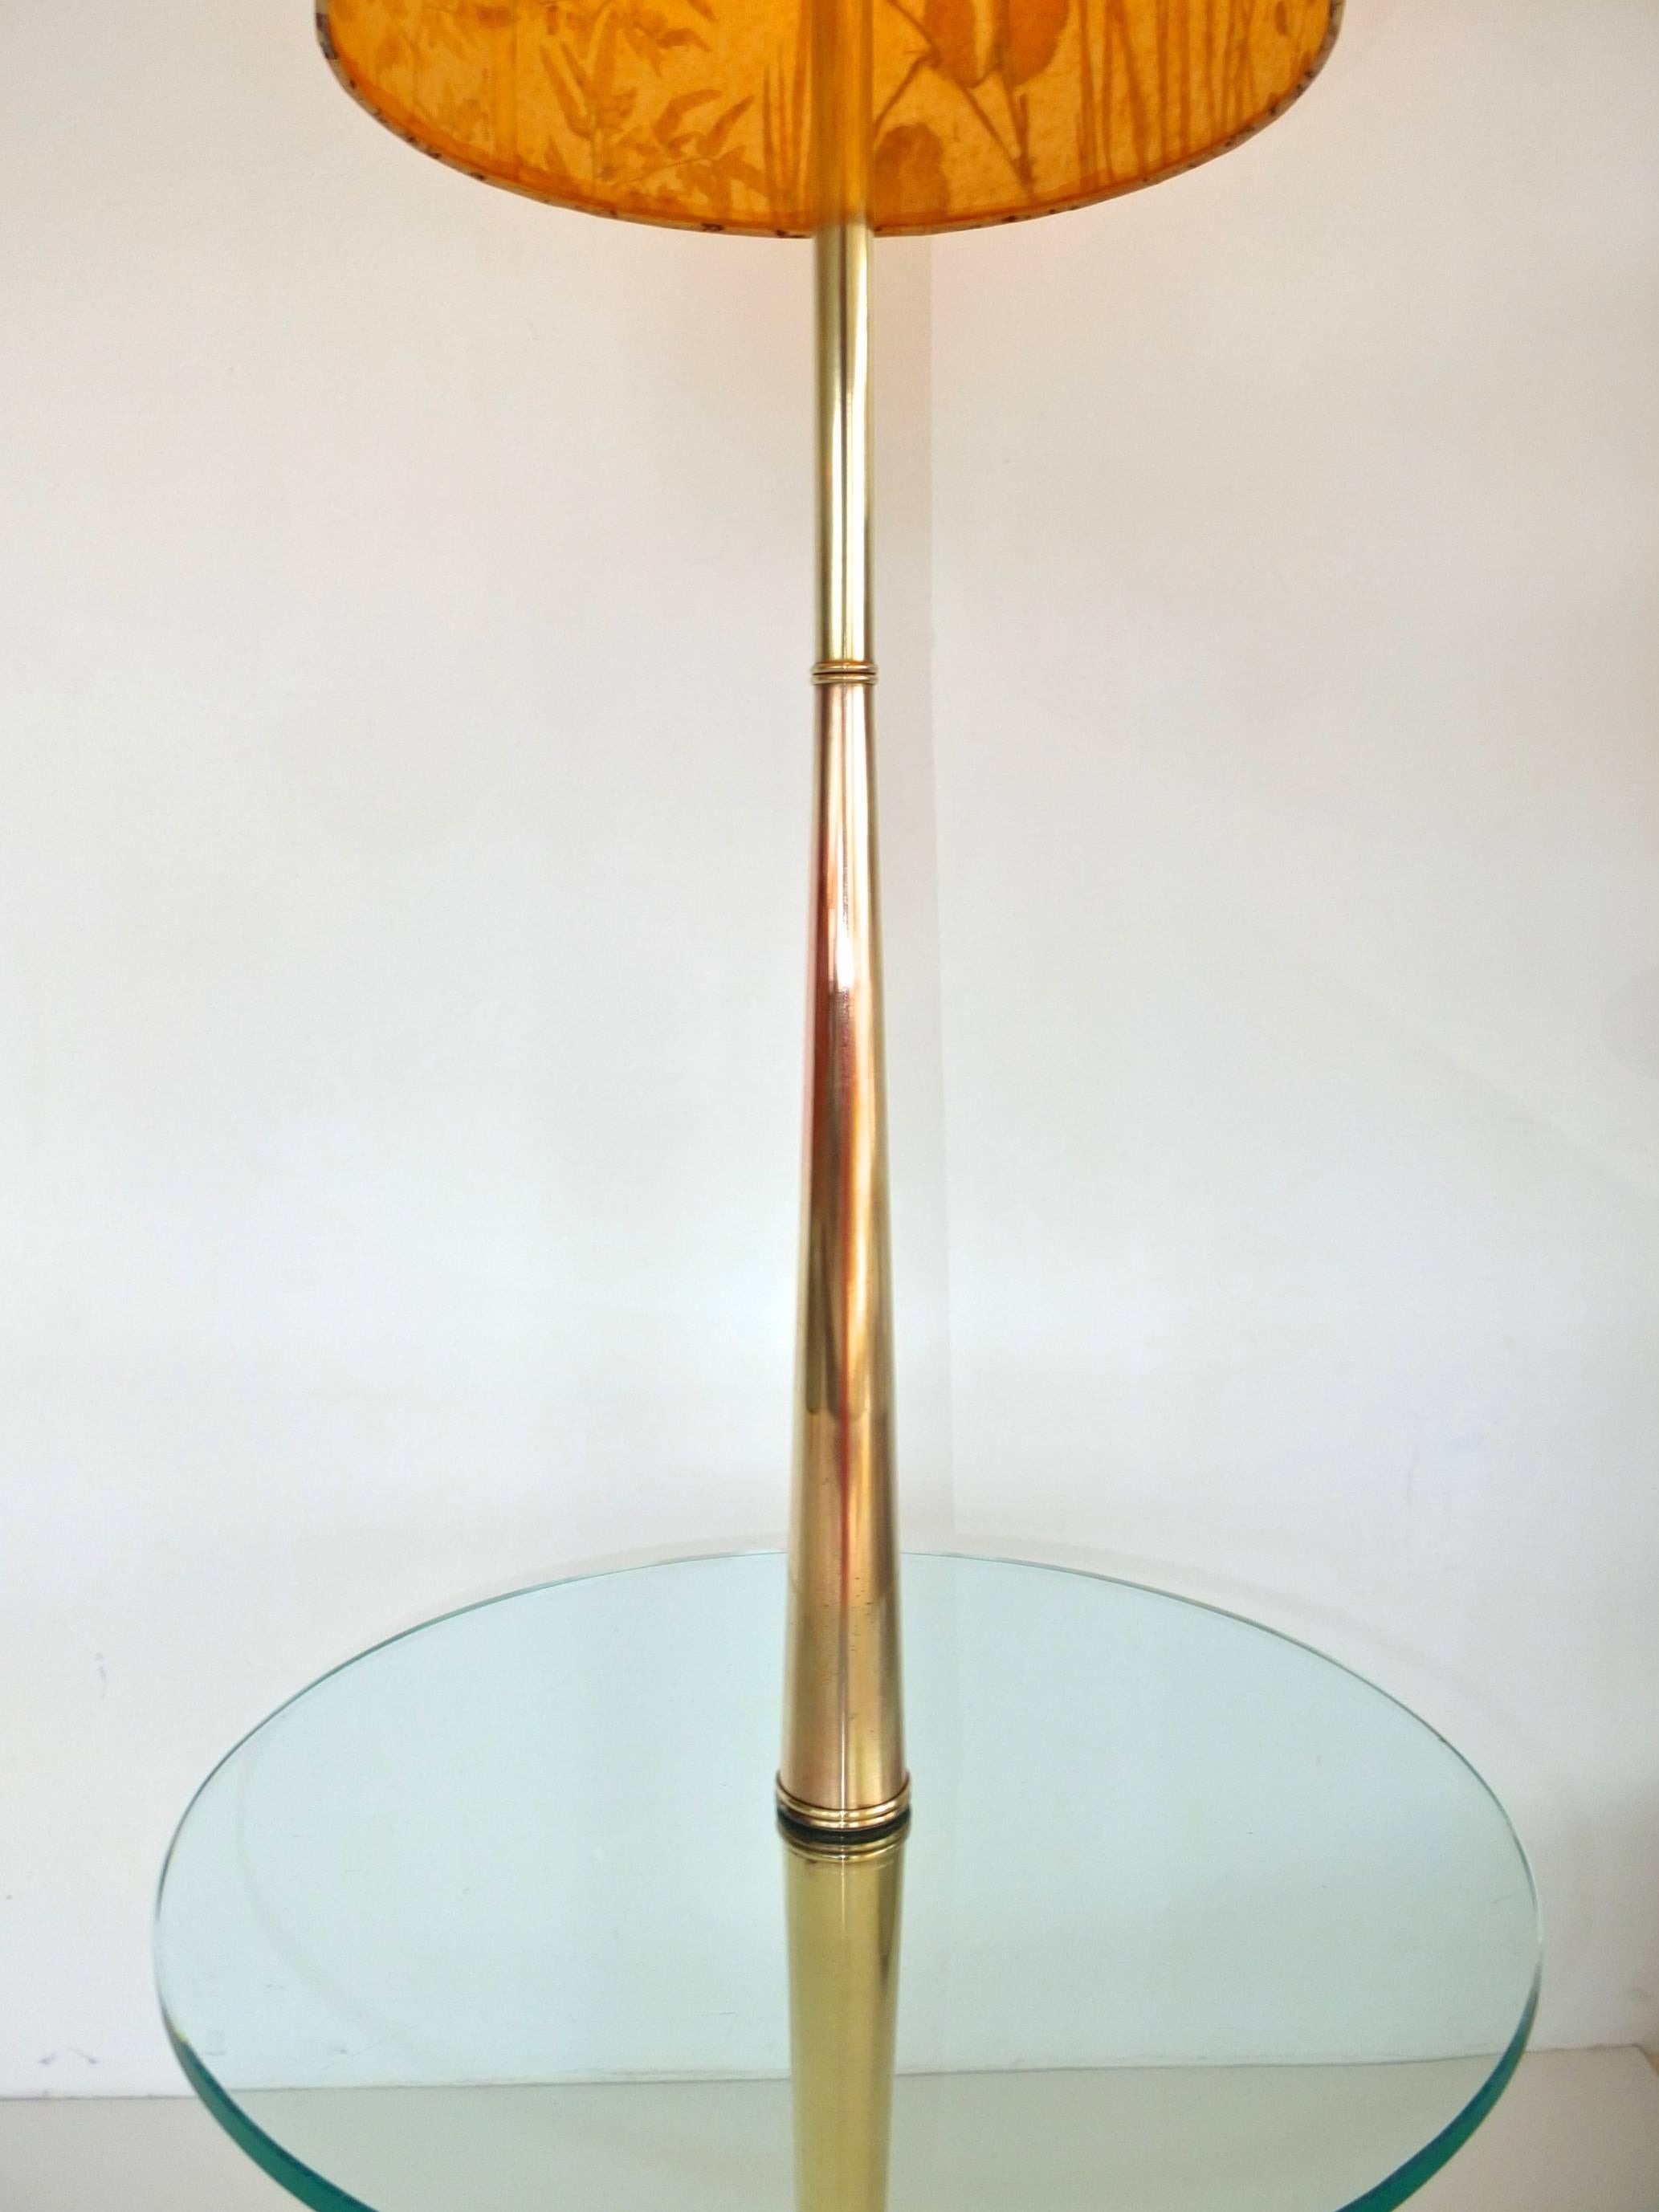 Vintage Tapered Brass Floor Lamp with Integrated Glass Table In Excellent Condition For Sale In Hanover, MA